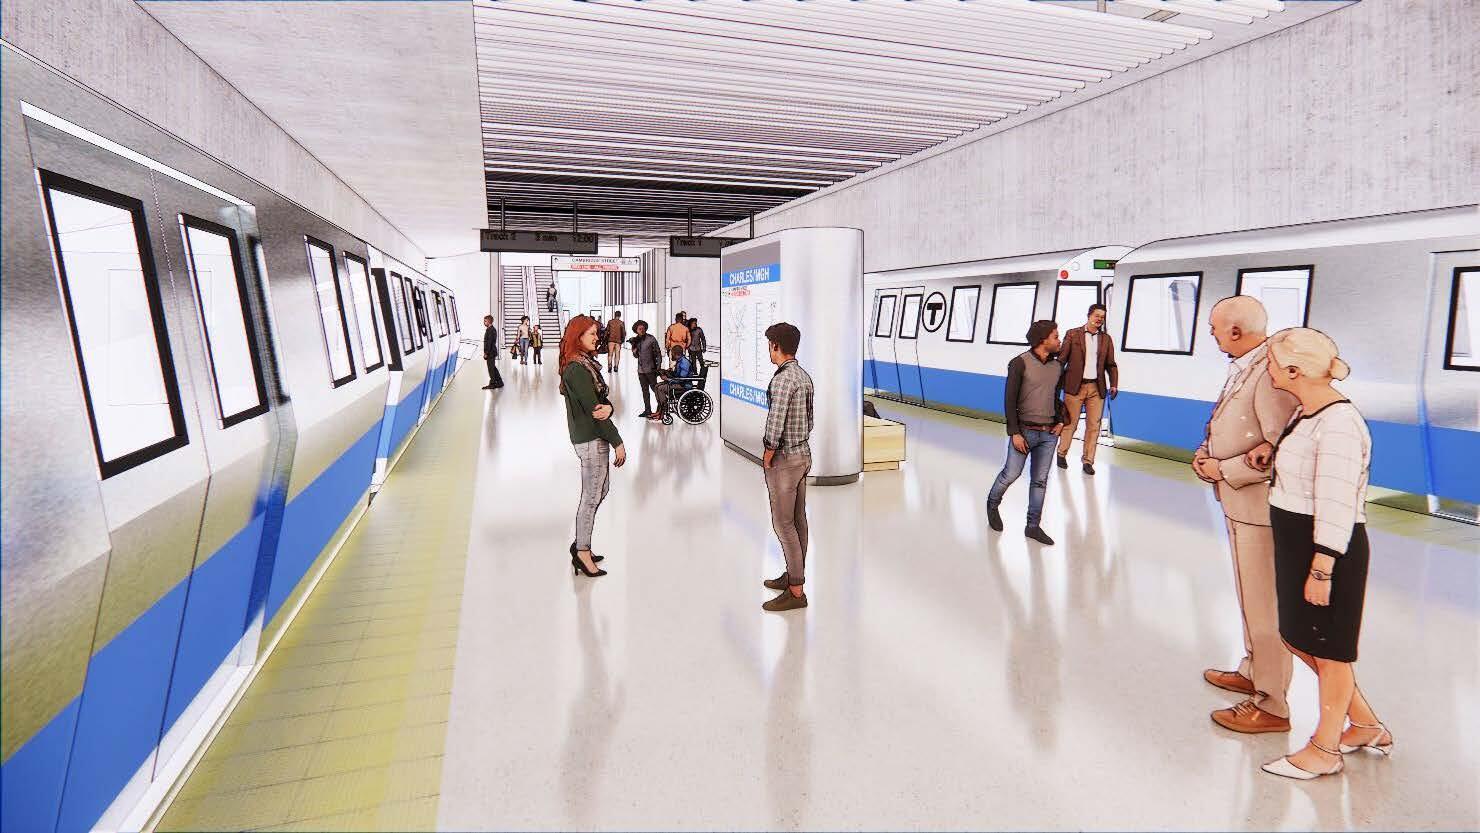 A digital rendering of a possible future Blue Line platform at the Charles/MGH station